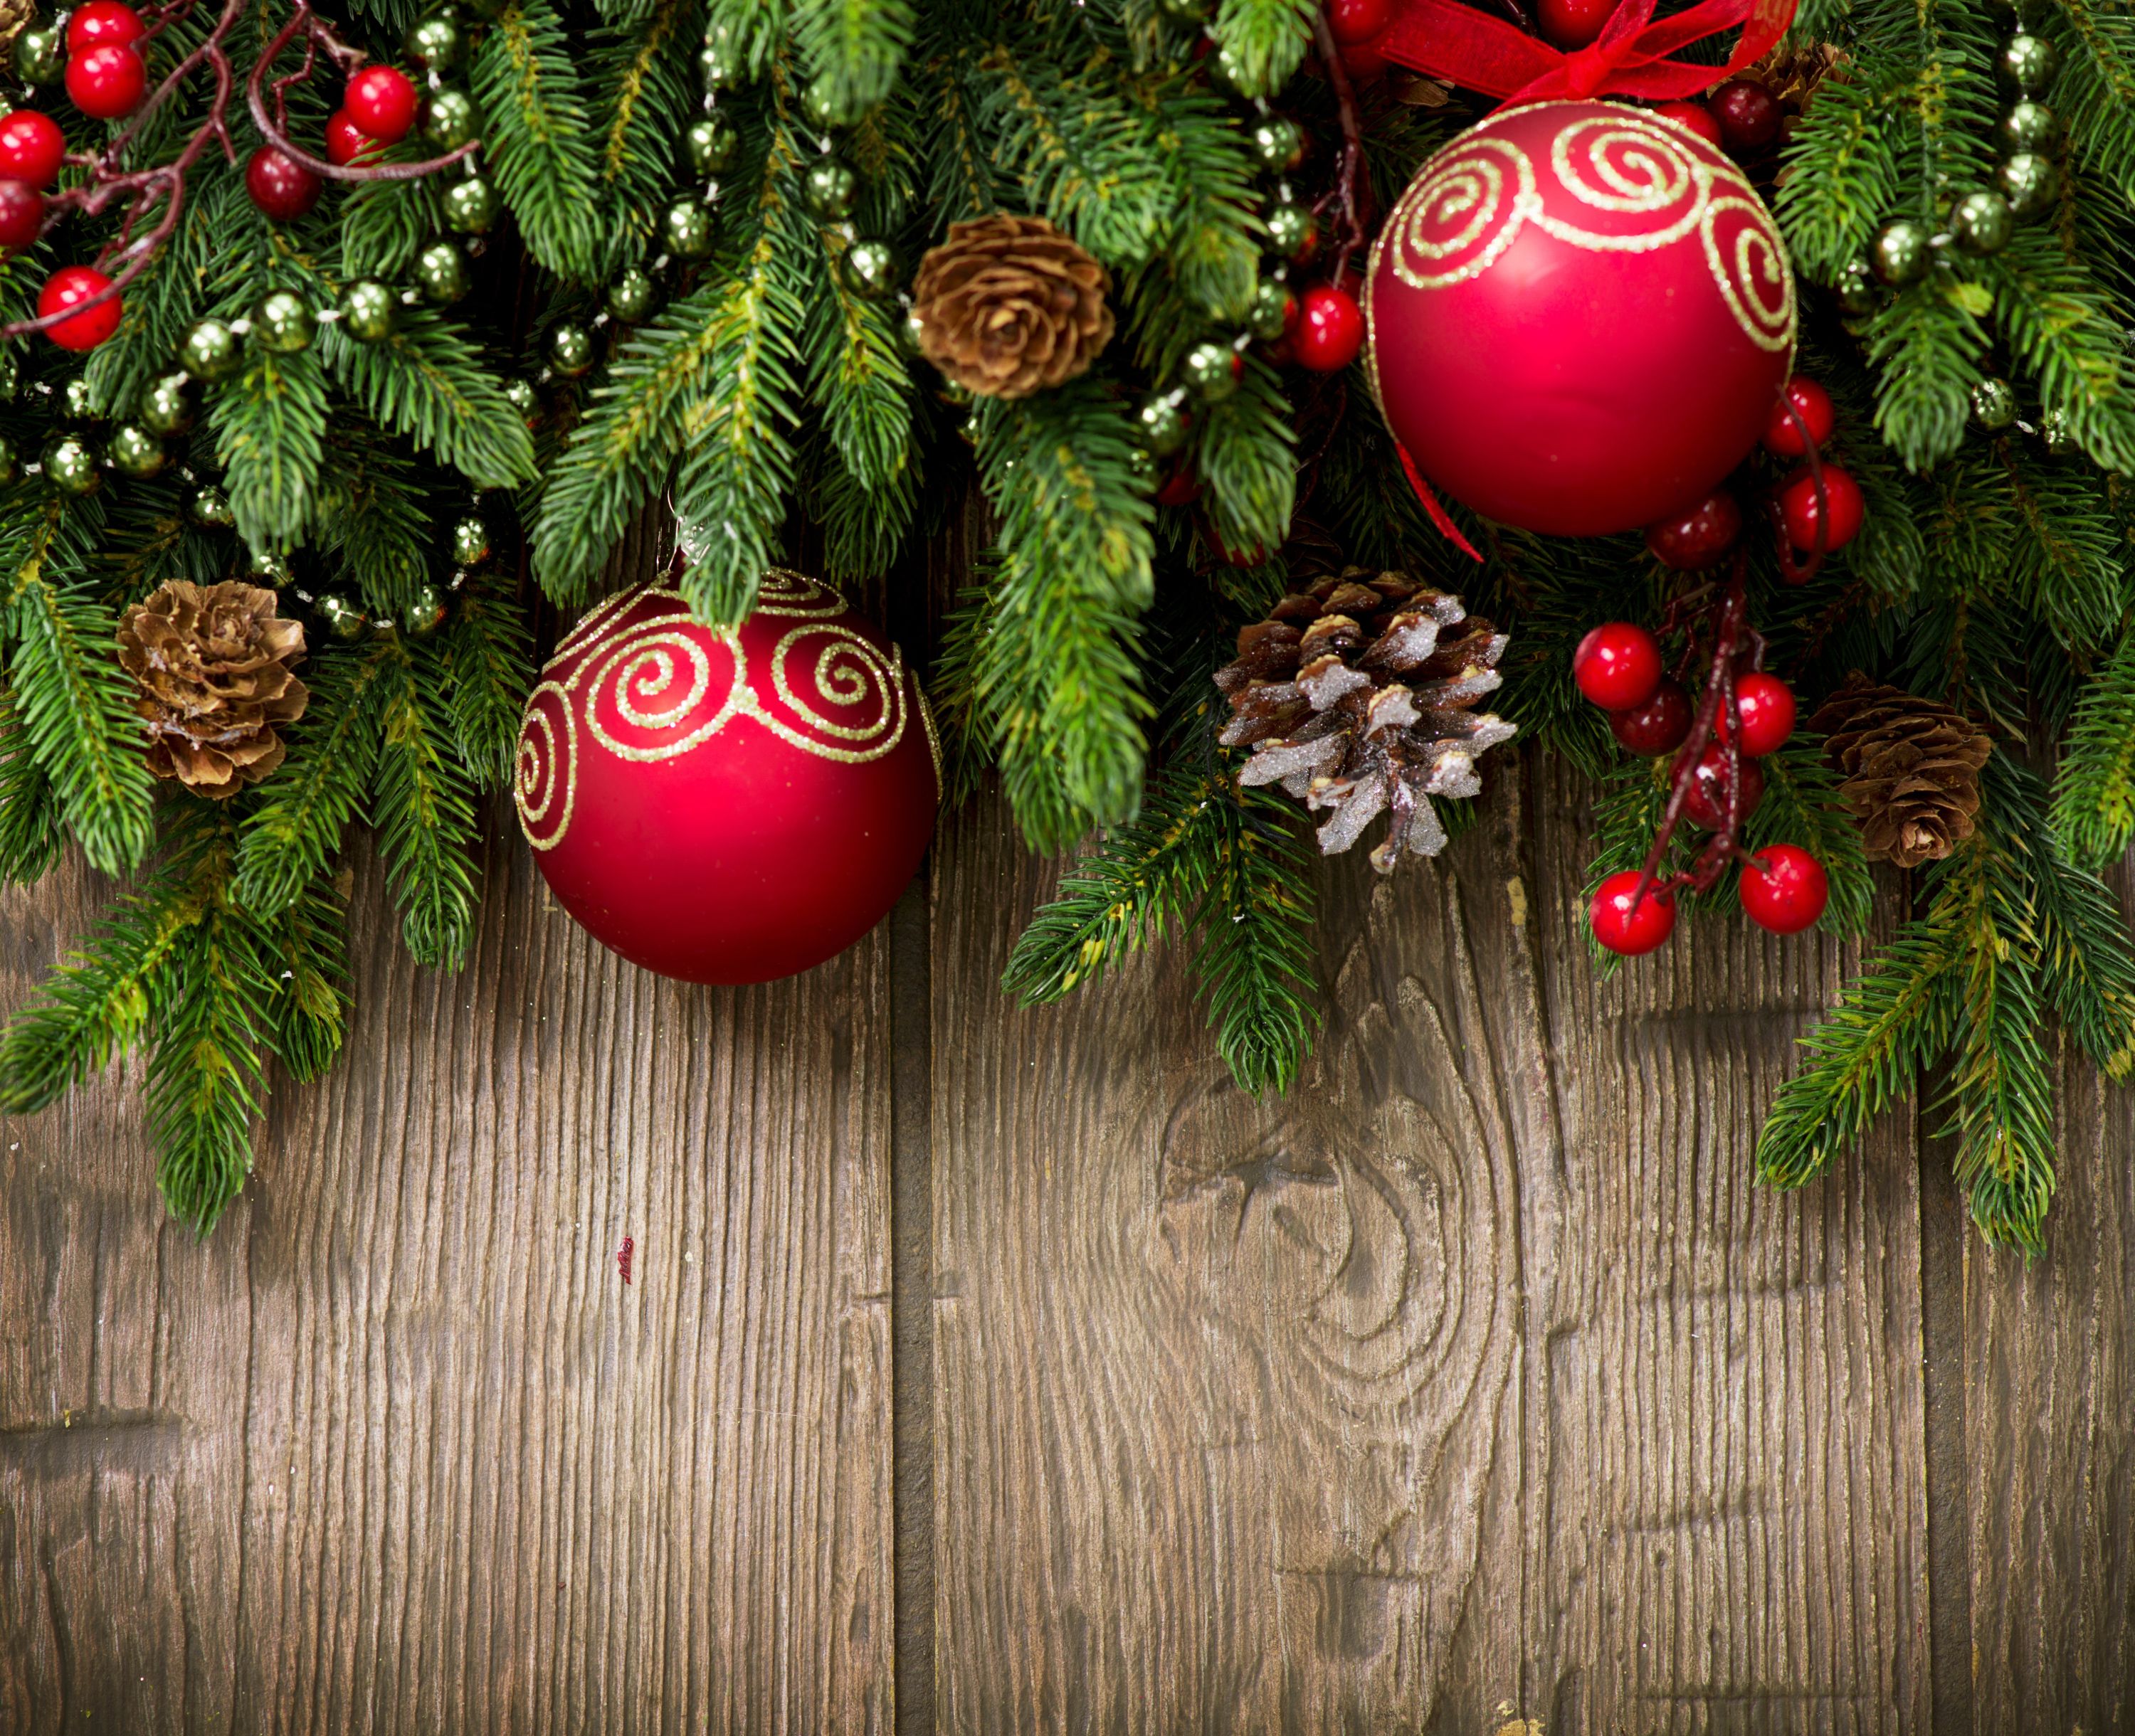 Wooden Christmas Background With Ornaments Quality Image And Transparent PNG Free Clipart